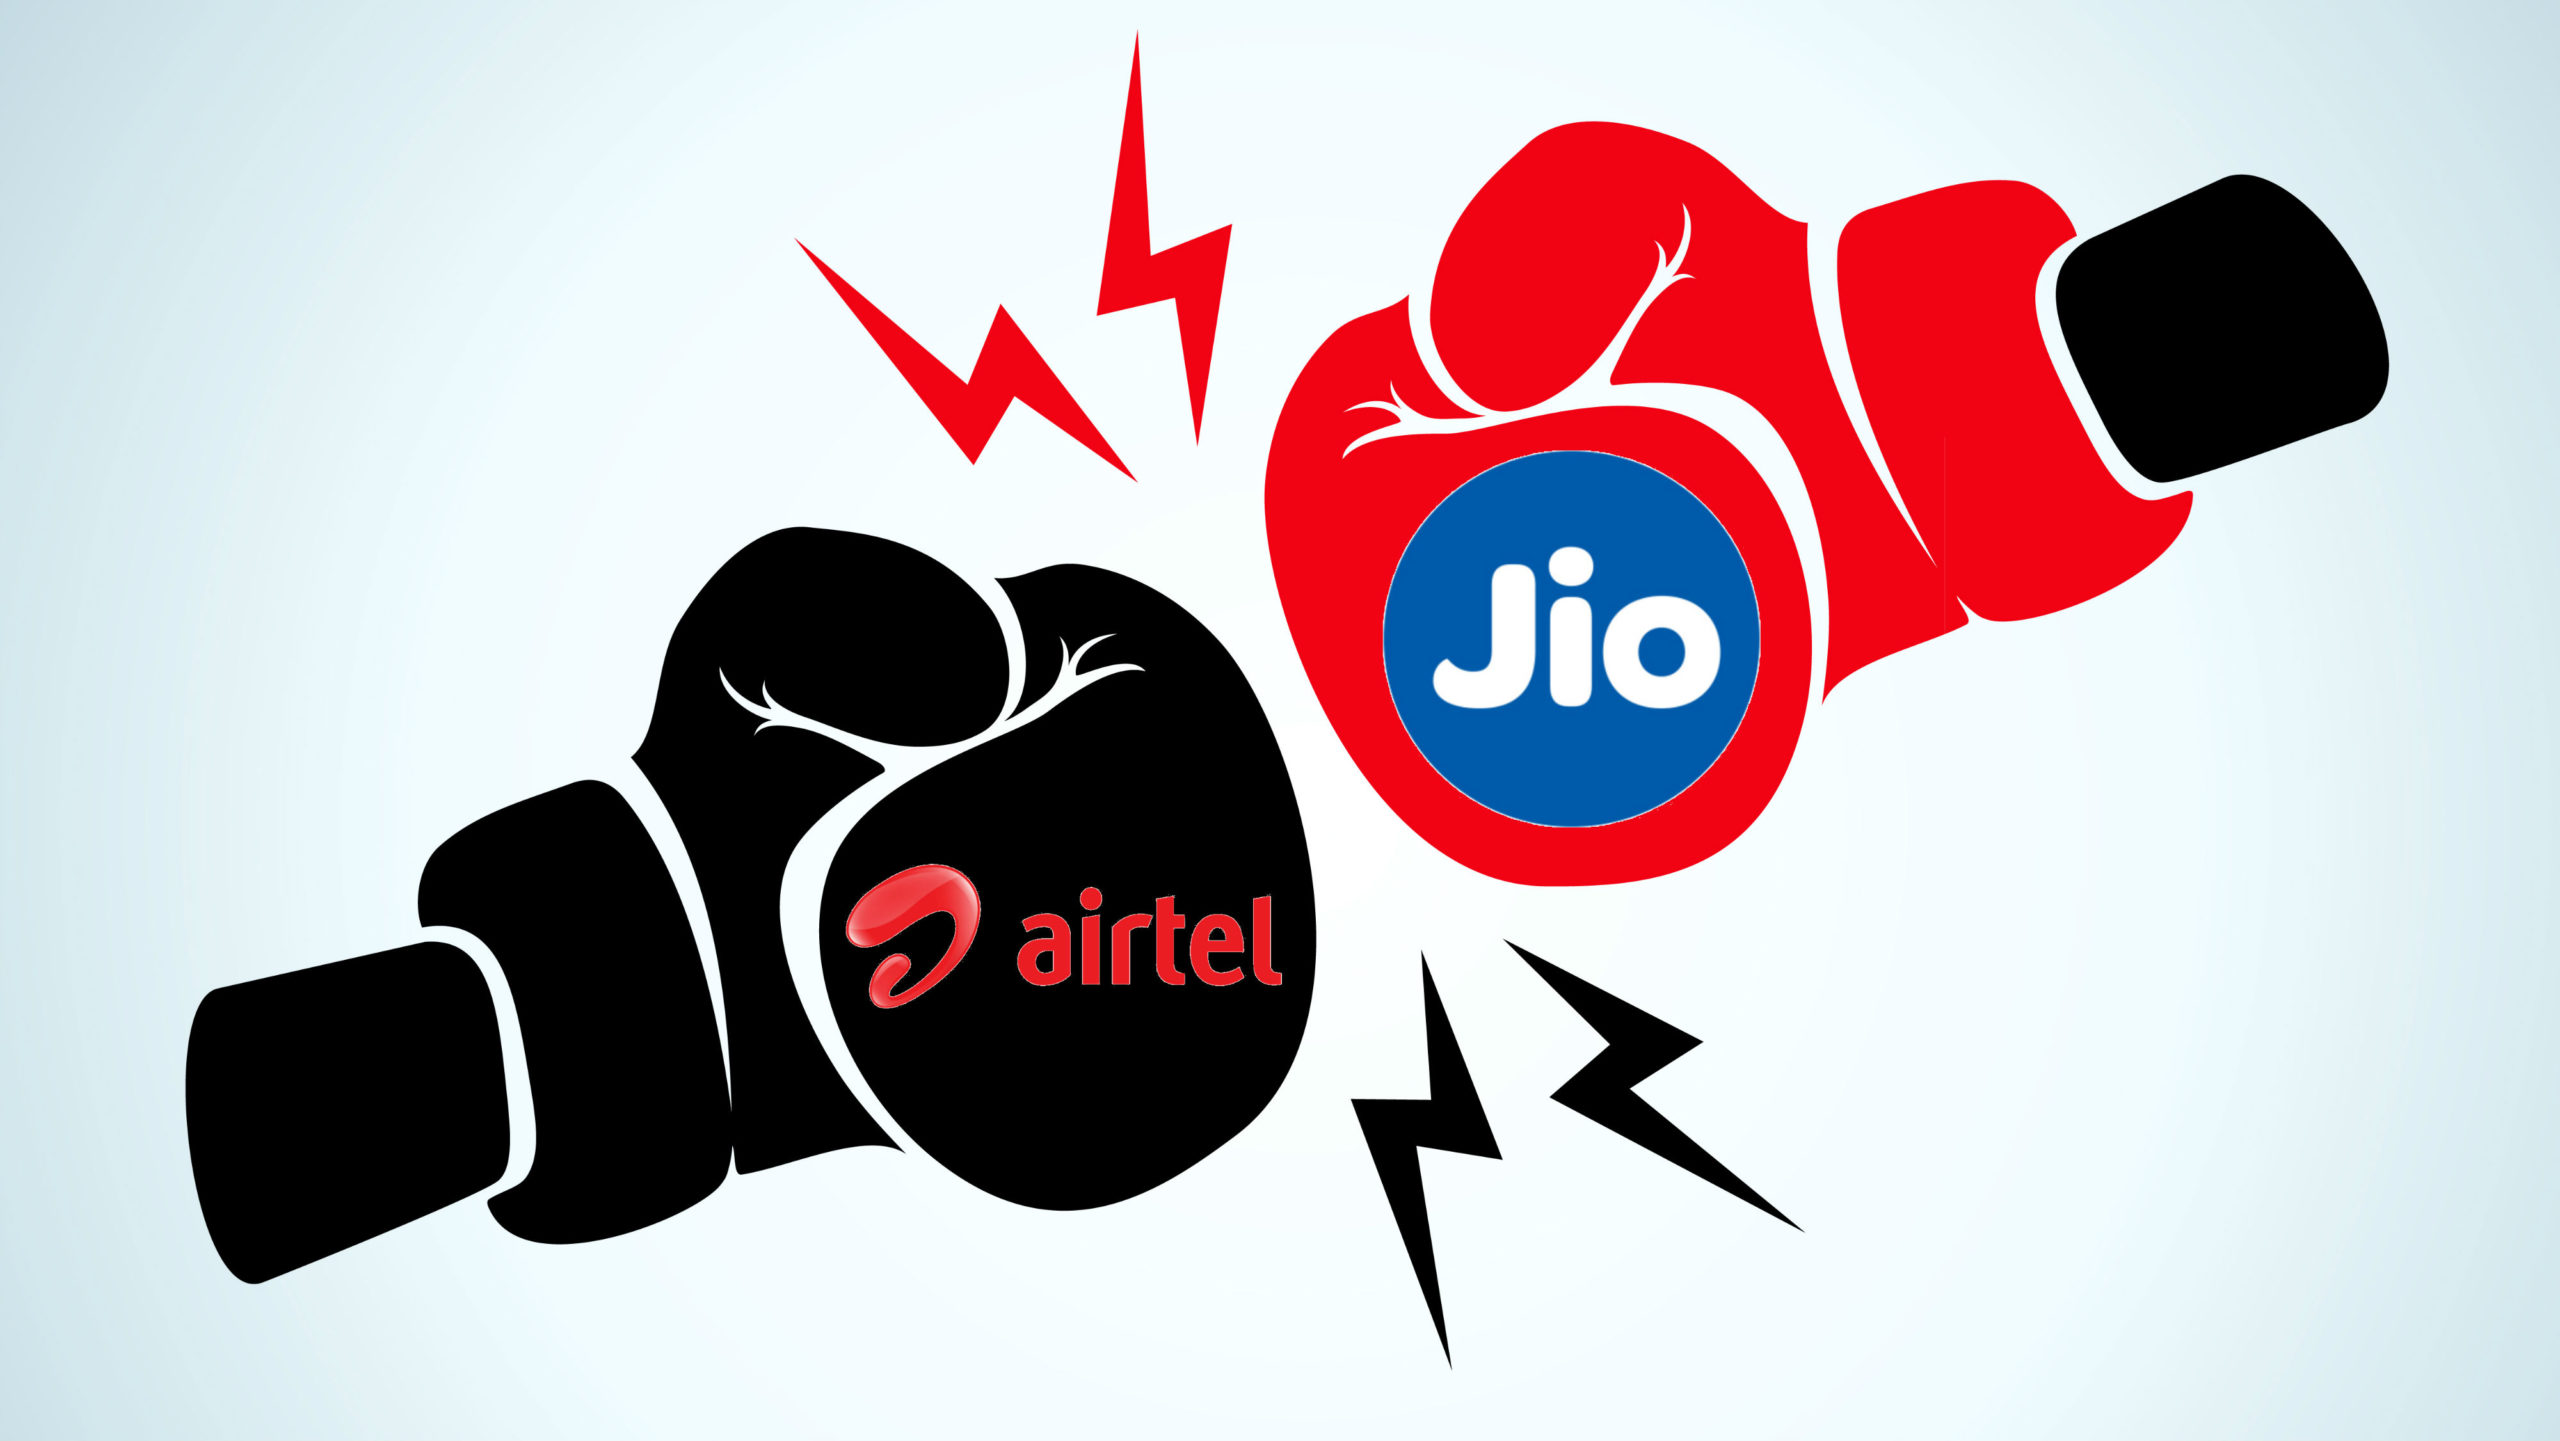 84 days plan of jio and airtel